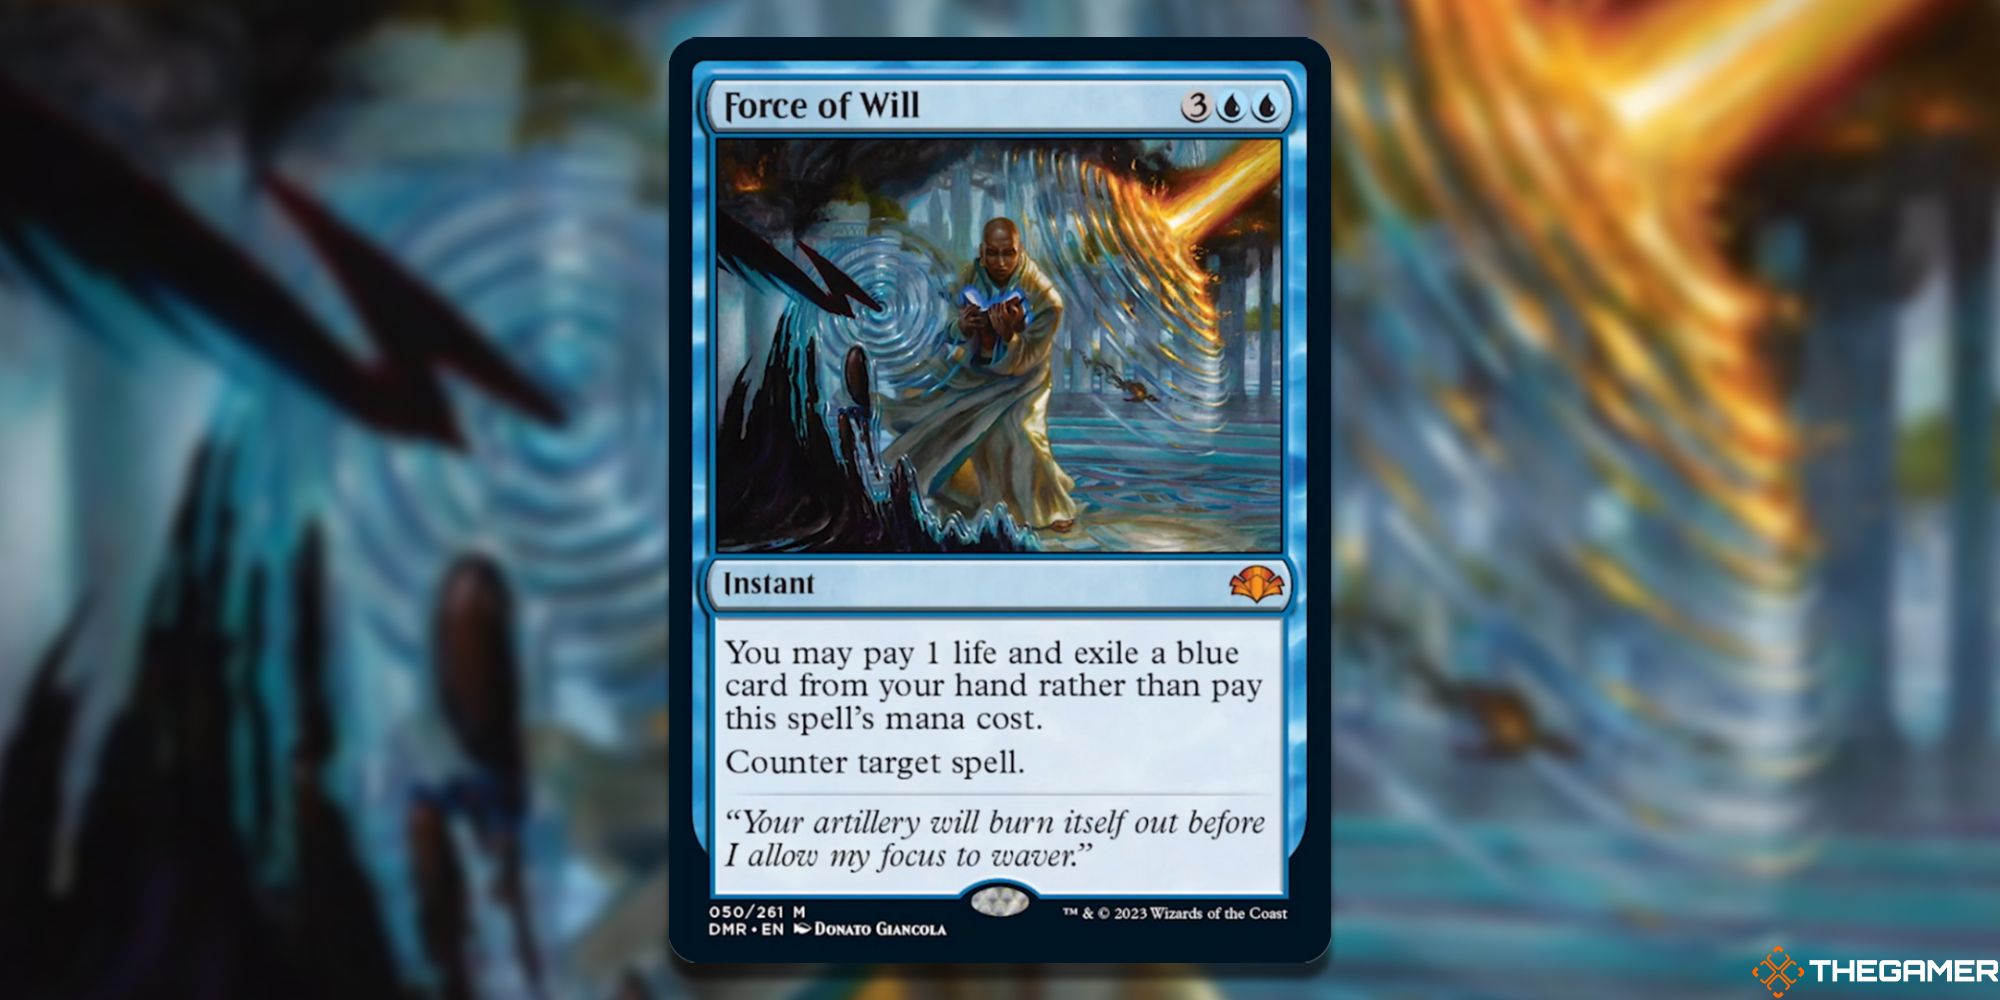  Image of the Force of Will card in Magic: The Gathering, with art by Donato Giancola